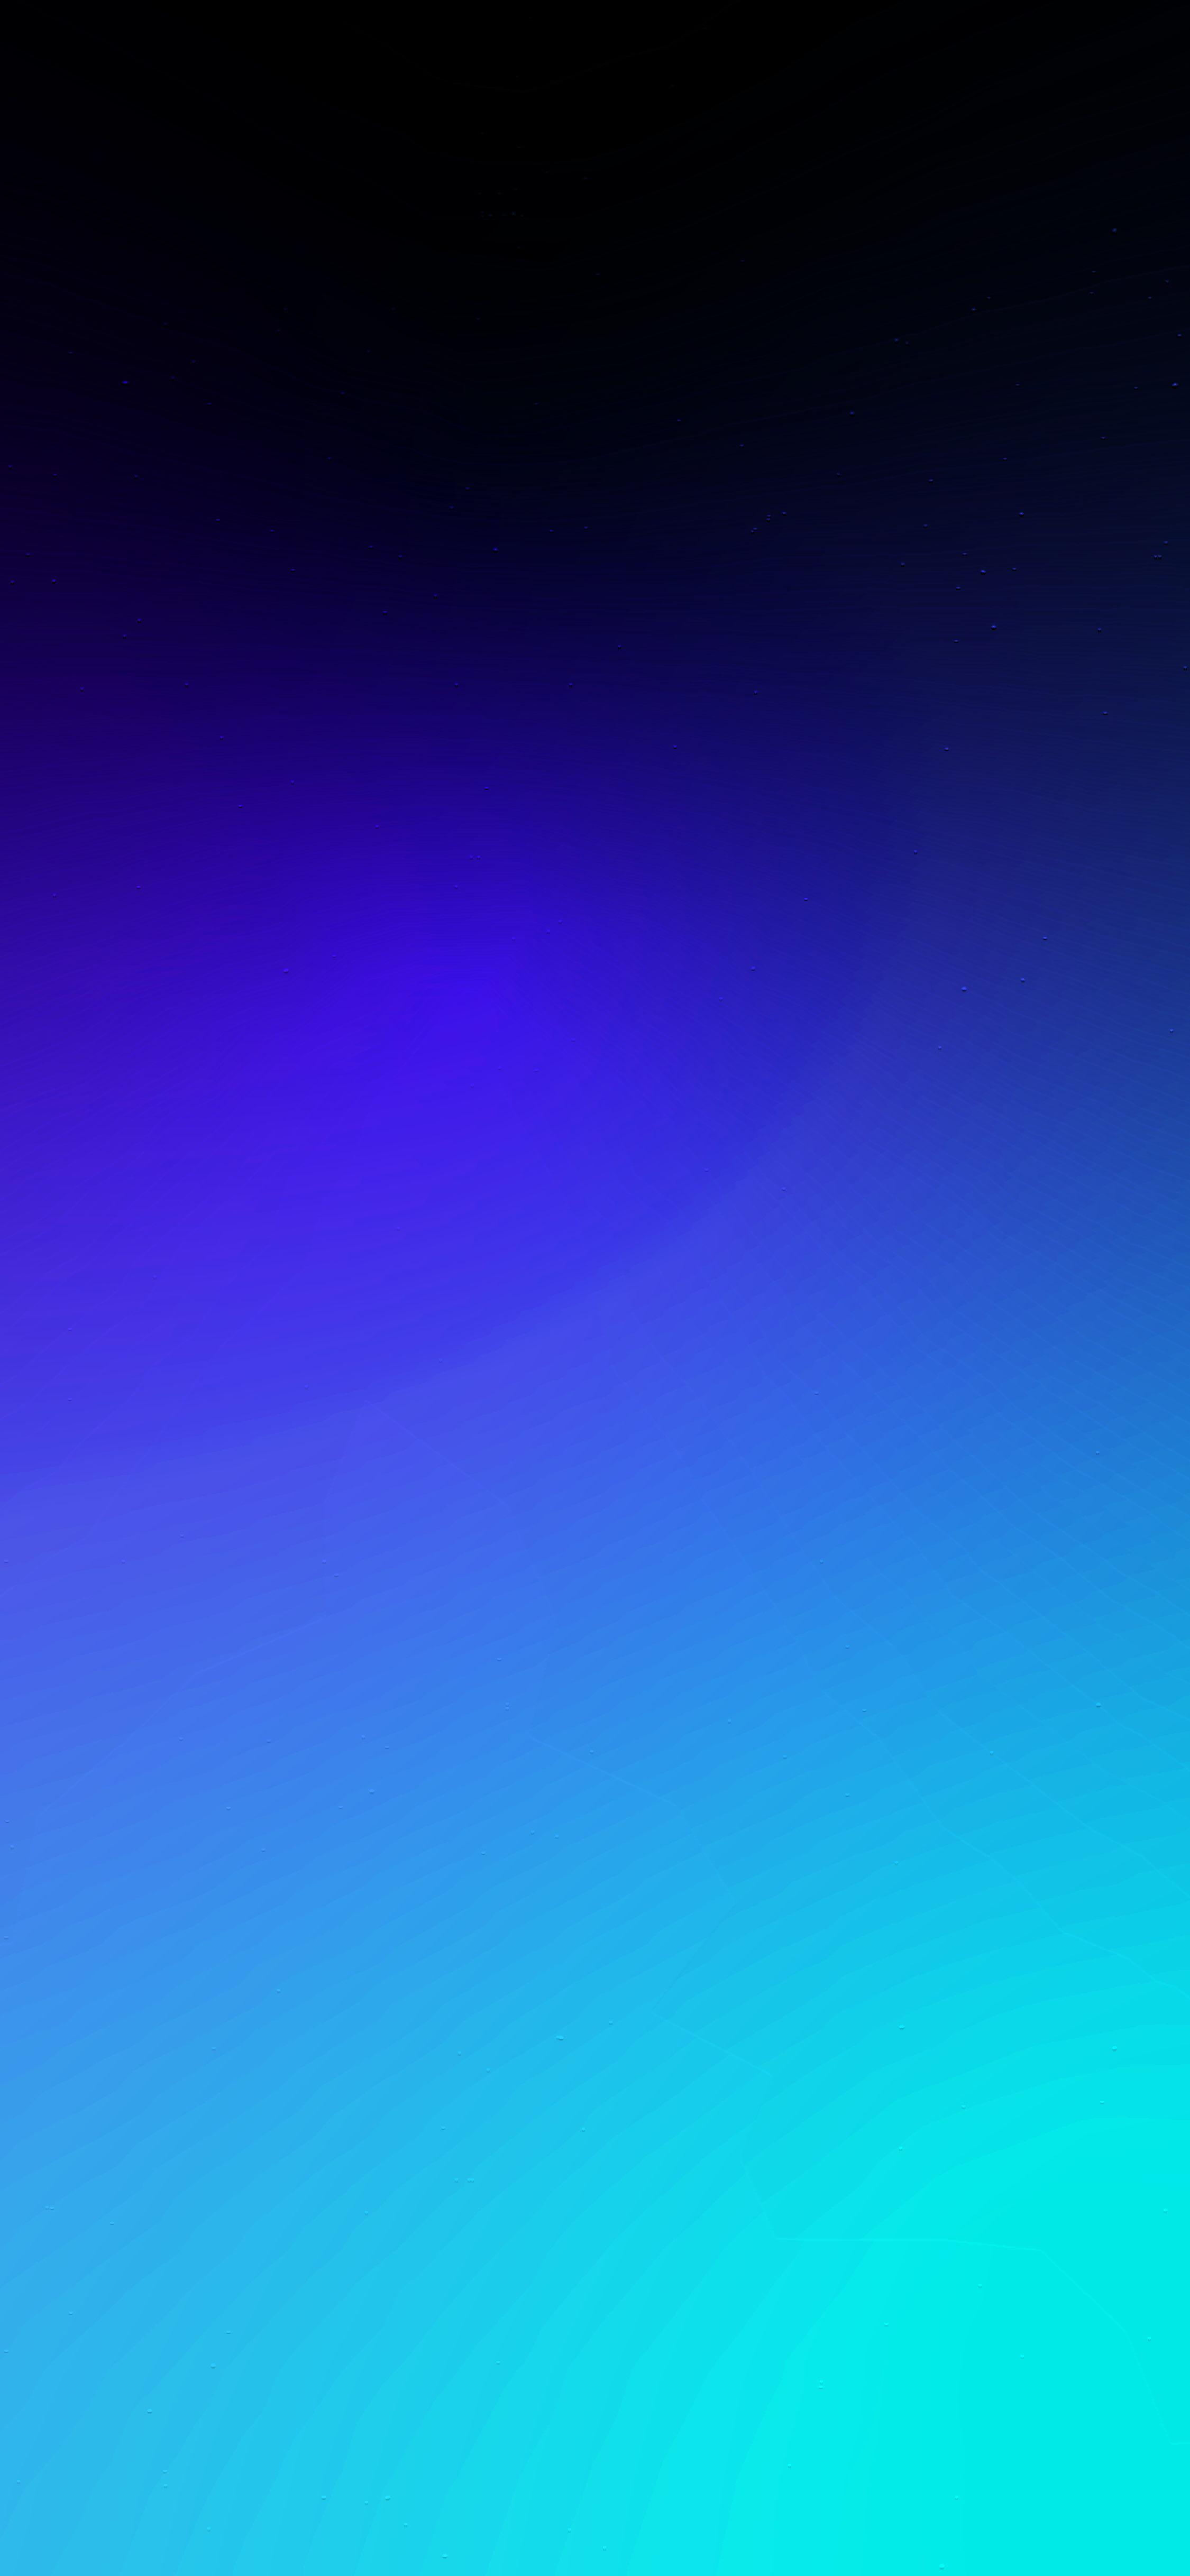 Light Blue Gradient iPhone Wallpaper / Abstract / Phone Lock - Etsy